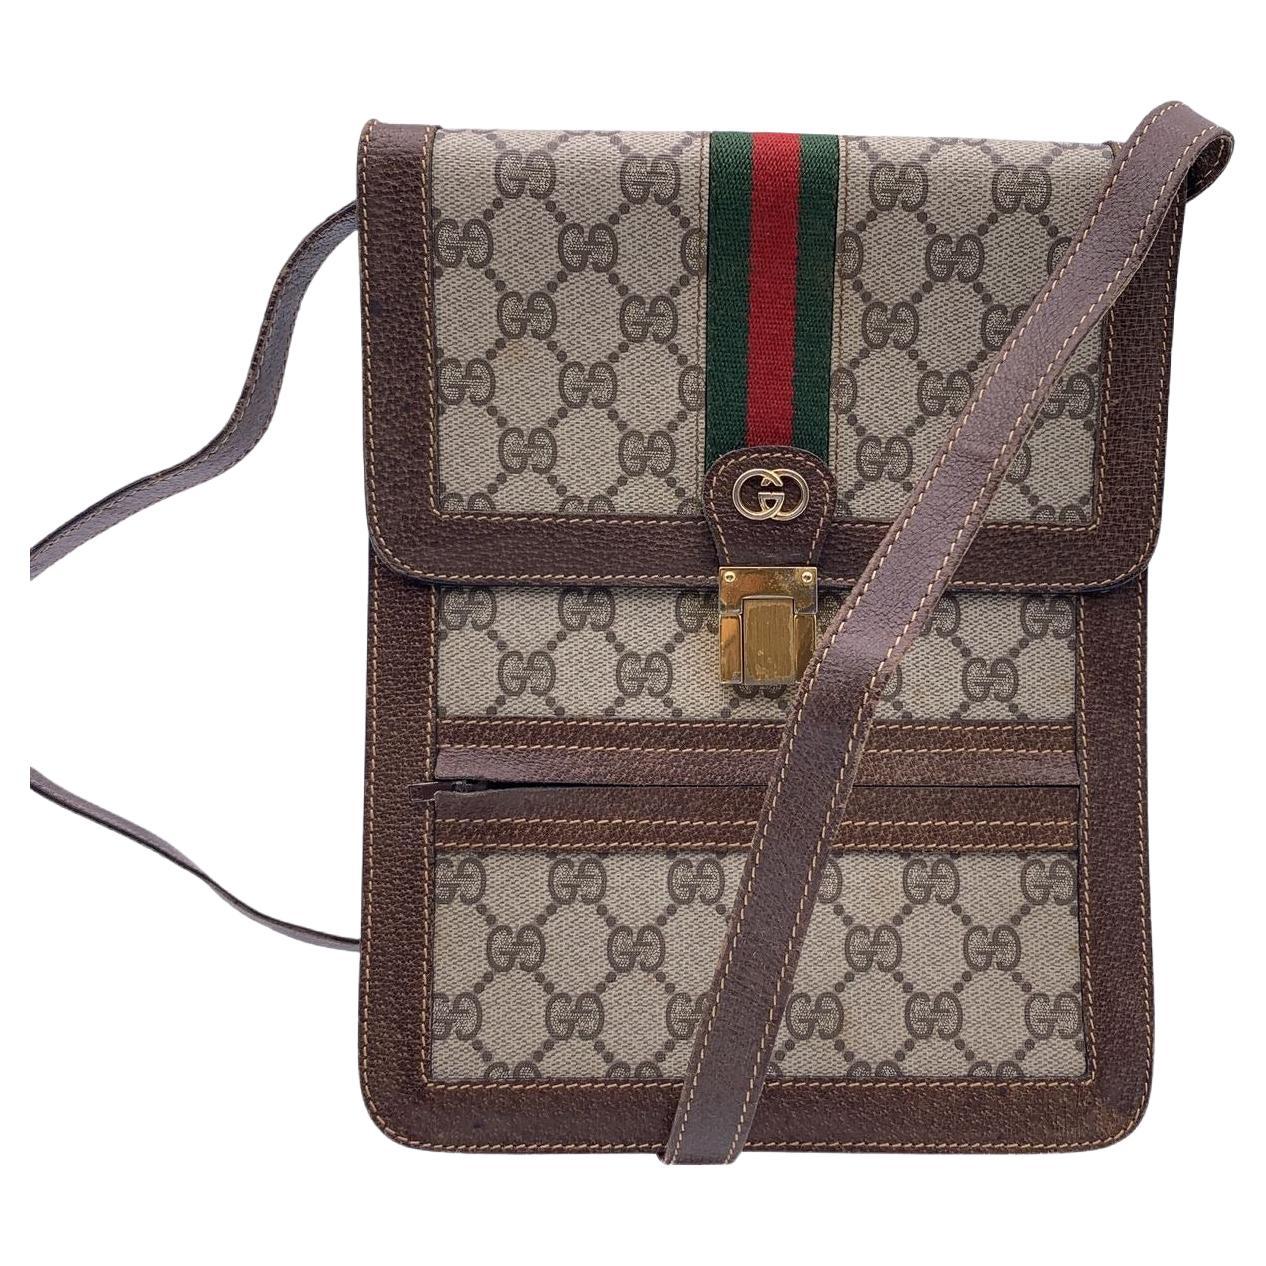 Gucci Logo Bags - 257 For Sale on 1stDibs | gucci emblem for sale